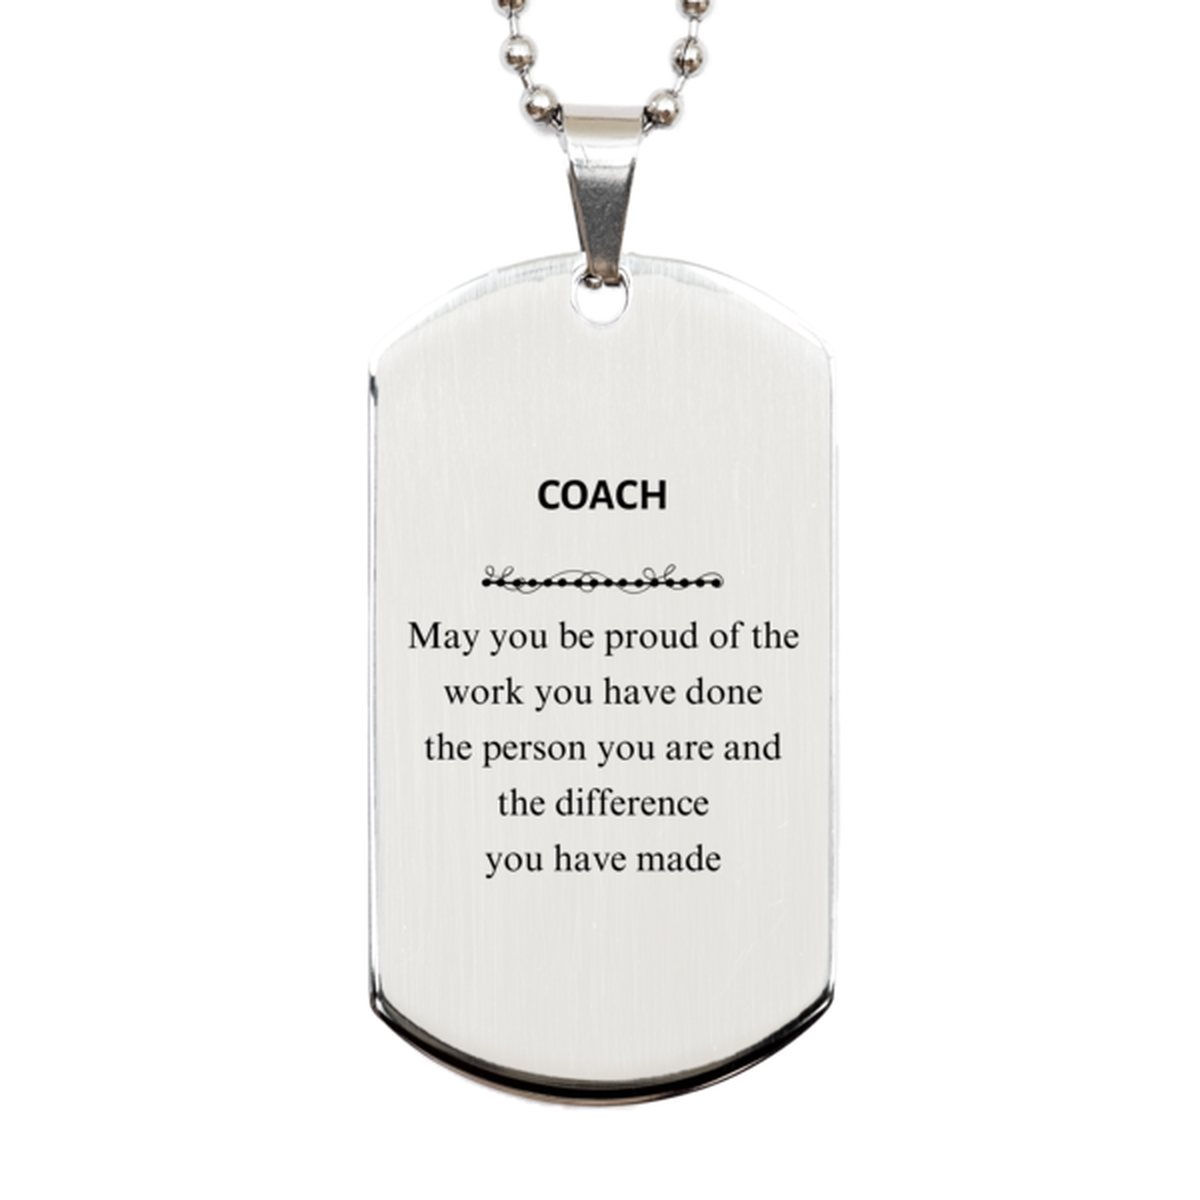 Coach May you be proud of the work you have done, Retirement Coach Silver Dog Tag for Colleague Appreciation Gifts Amazing for Coach